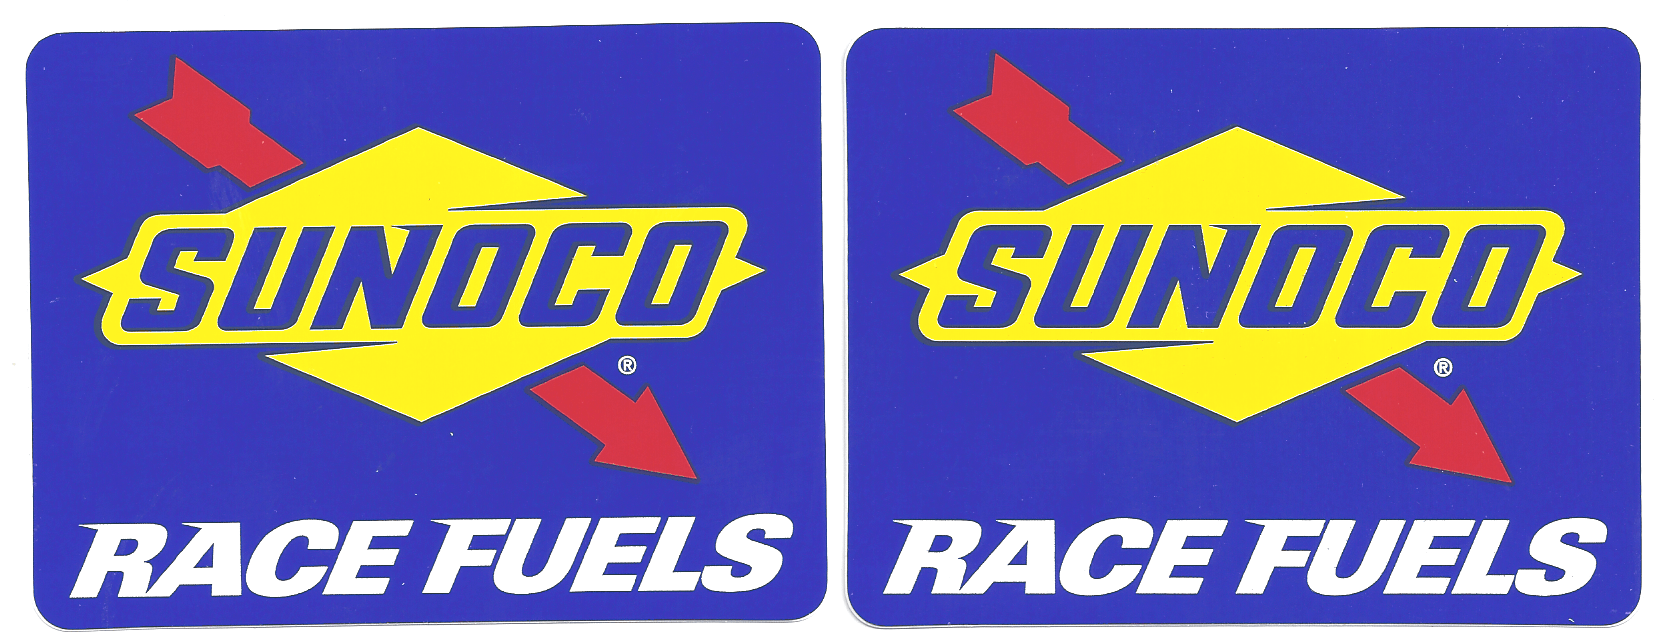 Sunoco Logo - Sunoco Racing Decals Stickers 6 Inches Paired. CrashDaddy Racing Decals